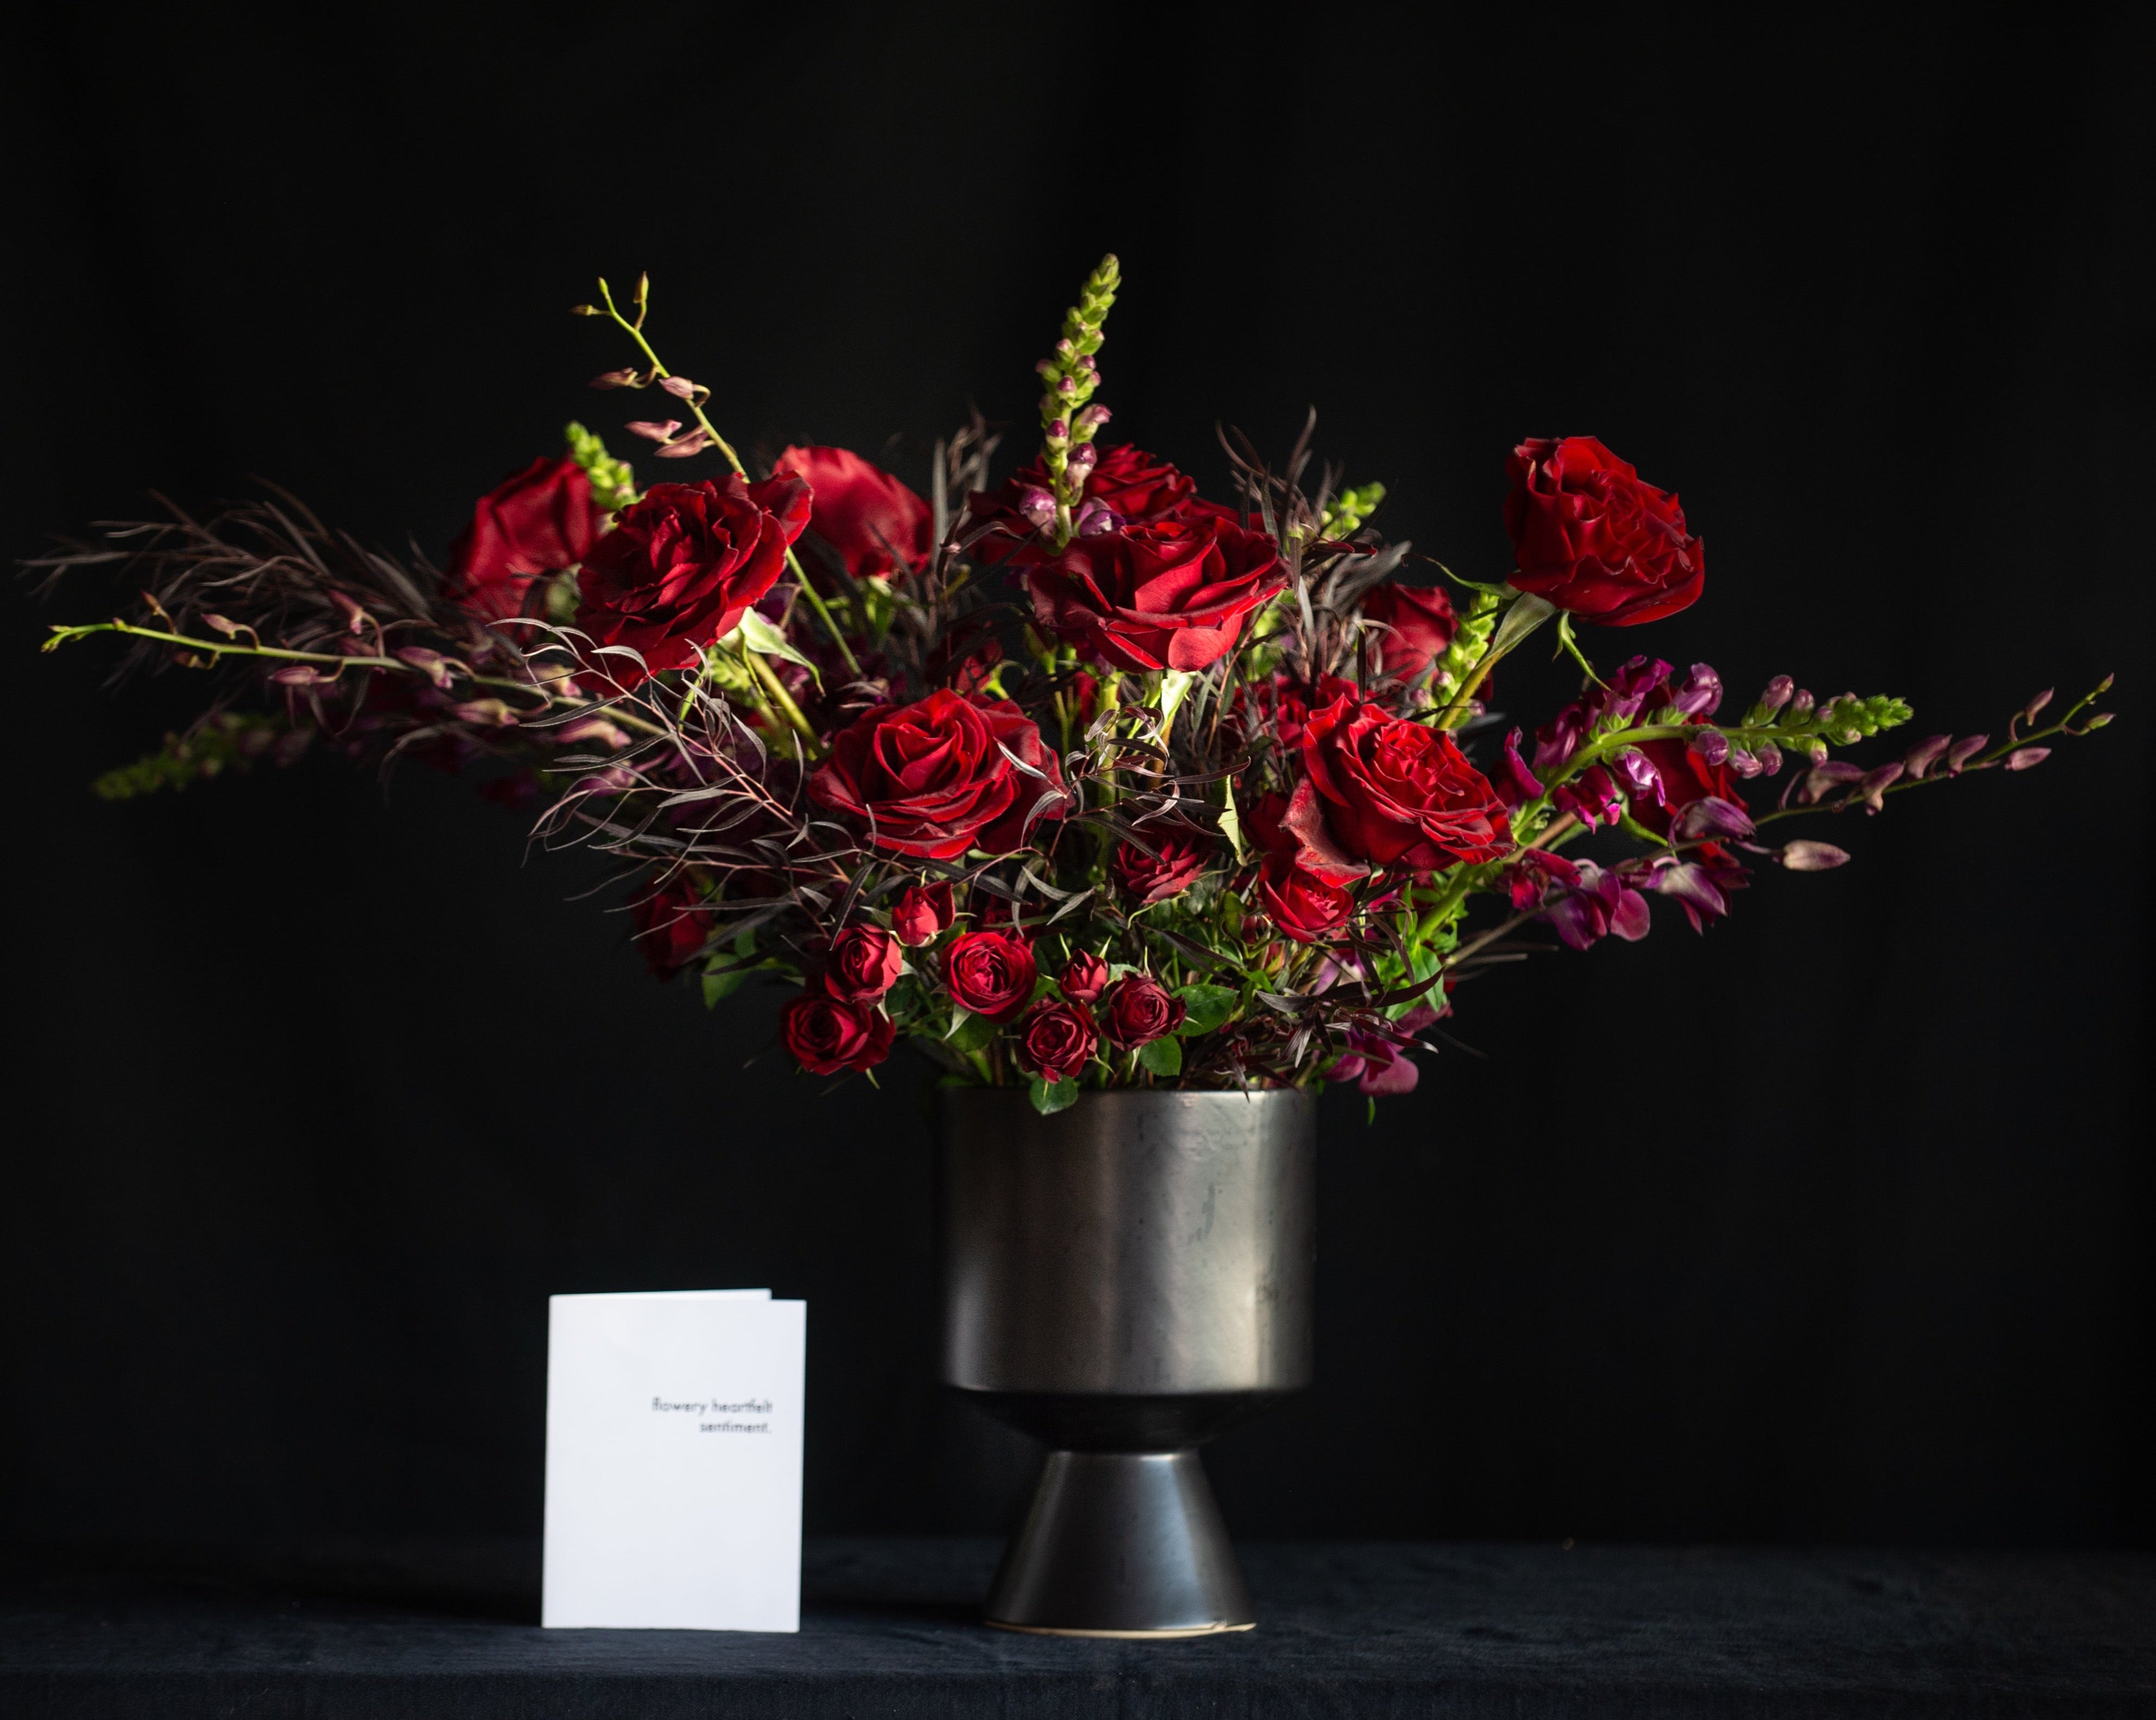 A dozen red roses with orchids, snapdragons, and dark foliage in a black footed vase